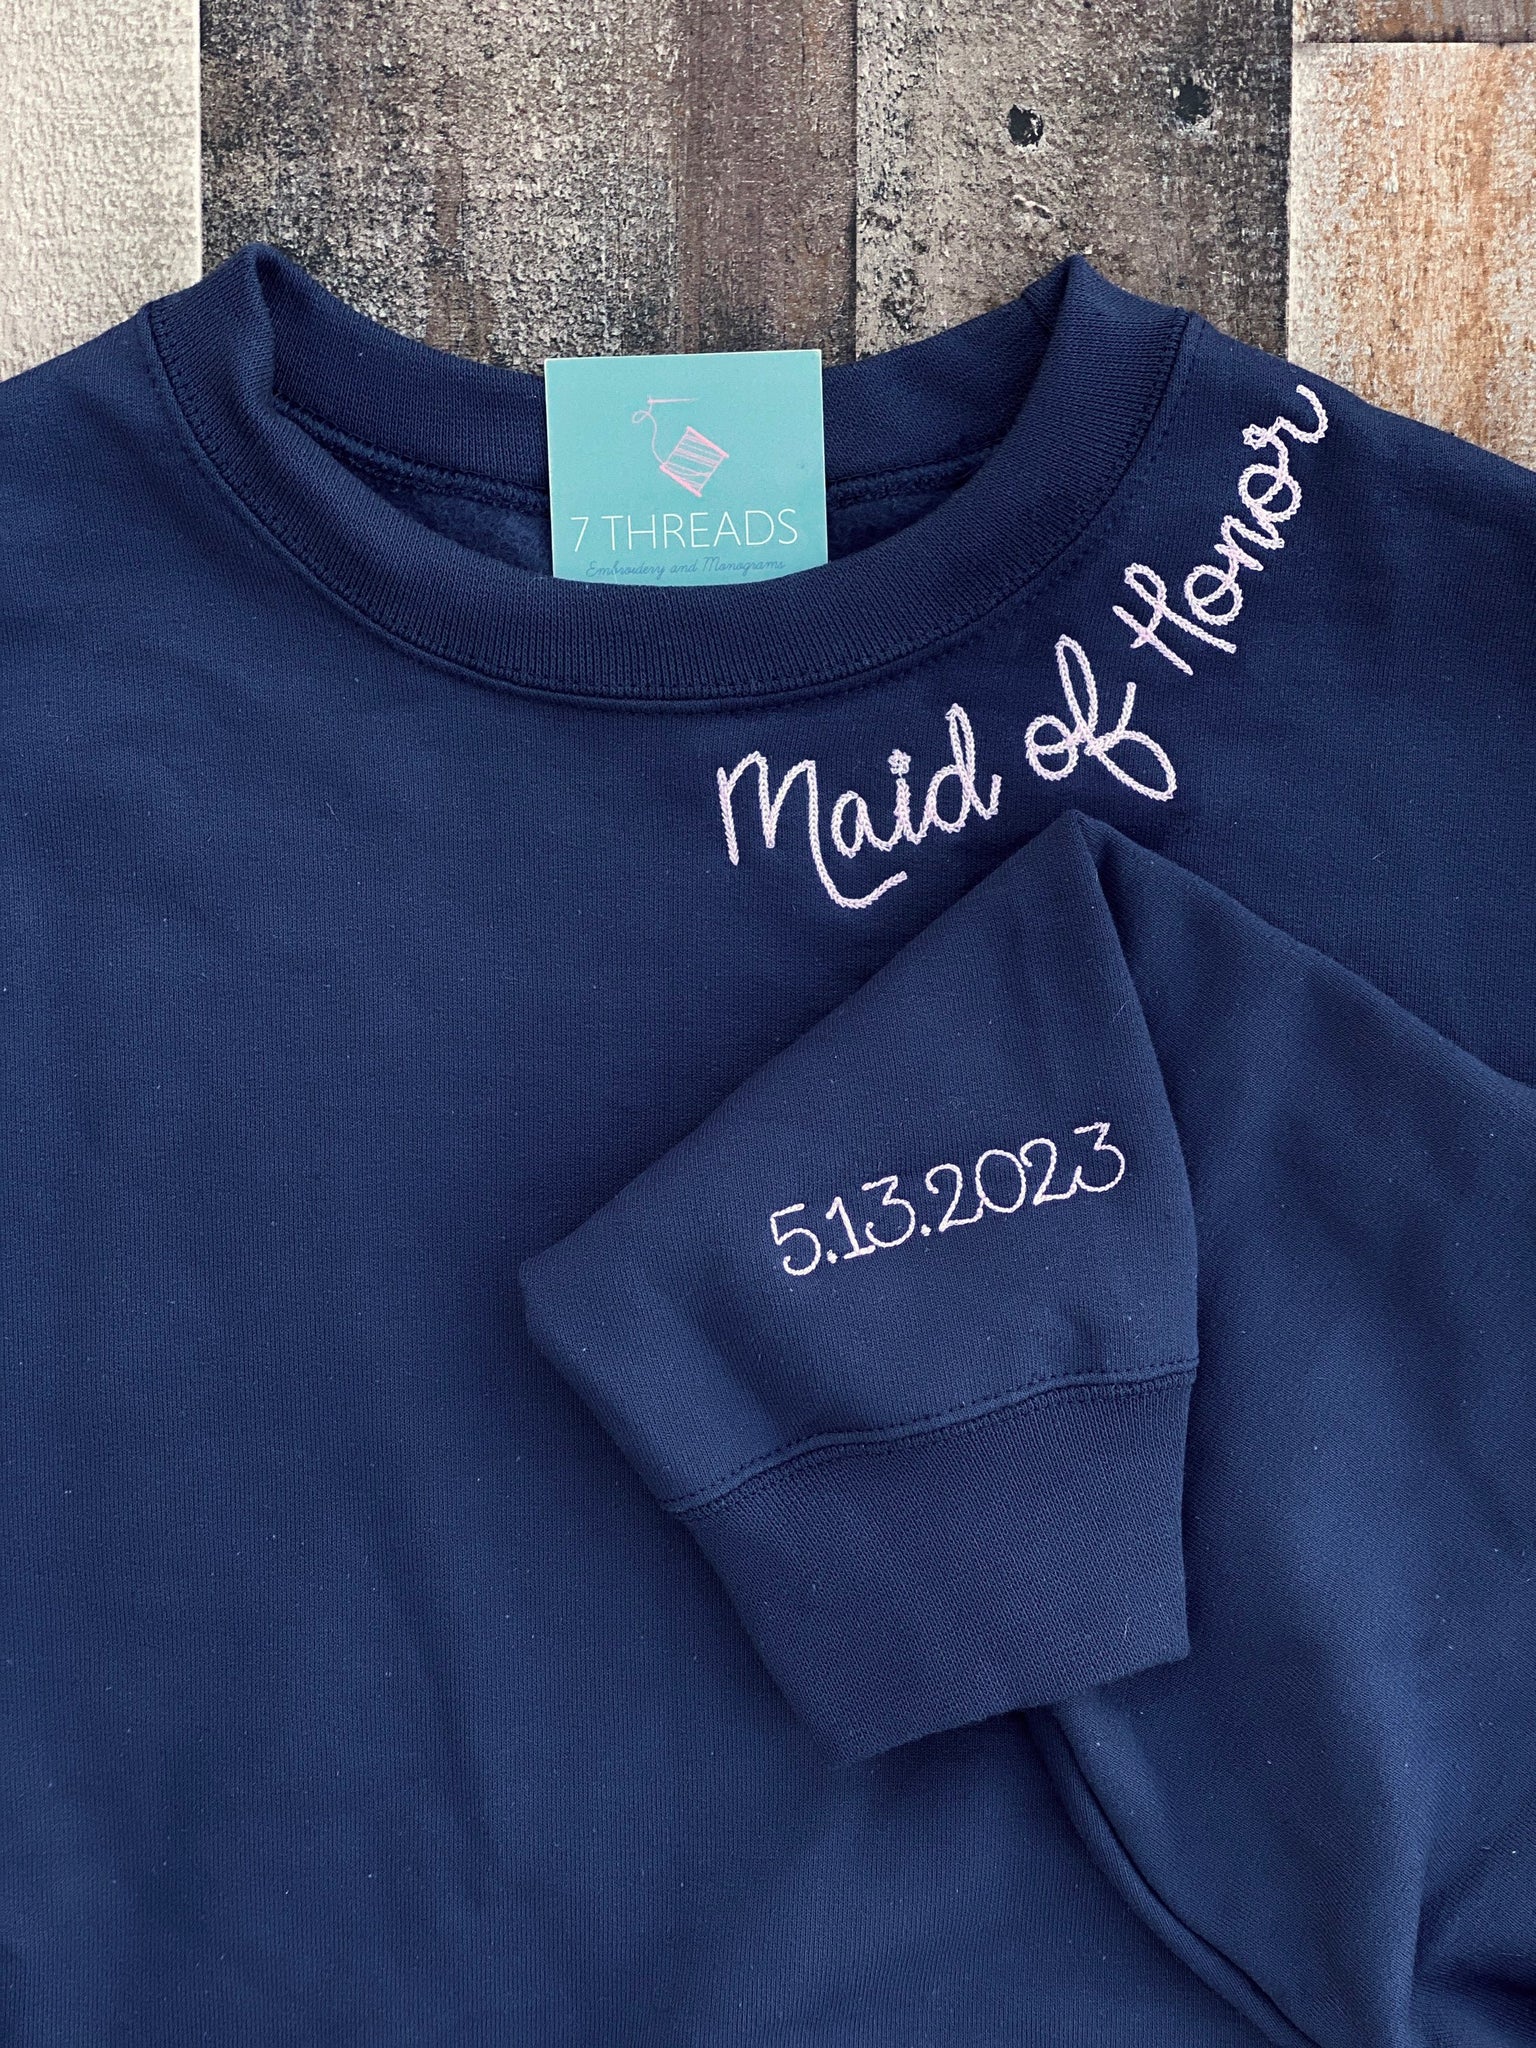 Always a Bridesmaid Custom Embroidered Sweatshirt with Personalized Neckline & Cuff Message